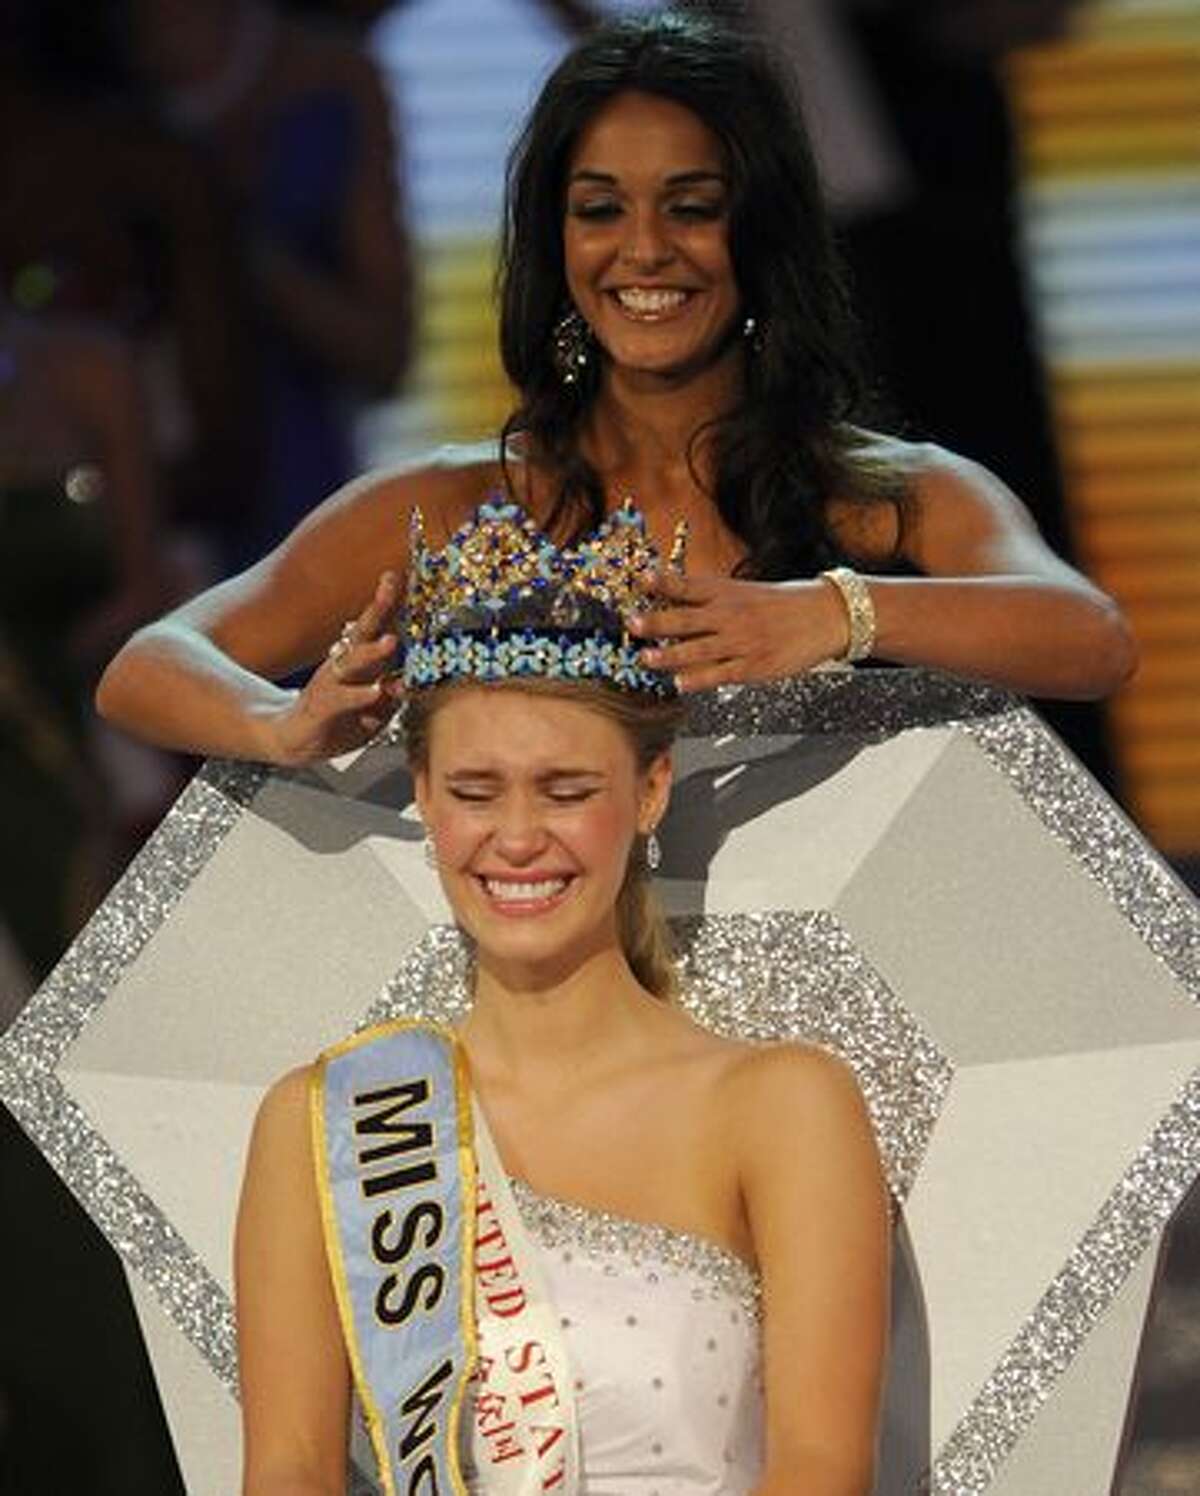 Alexandria Mills (seated) of the United States is crowned as the 2010 Miss World by 2009 Miss World Kaiane Aldorino from Gibraltar during the Miss World 2010 beauty pageant finals at the Beauty Crown Theatre in the southern Chinese resort town of Sanya on Saturday, Oct. 30, 2010. It was only the third win for the U.S. in the 60-year history of the pageant and the first in 20 years. Mills, 18 and a recent high school graduate, is from Louisville, Ky.